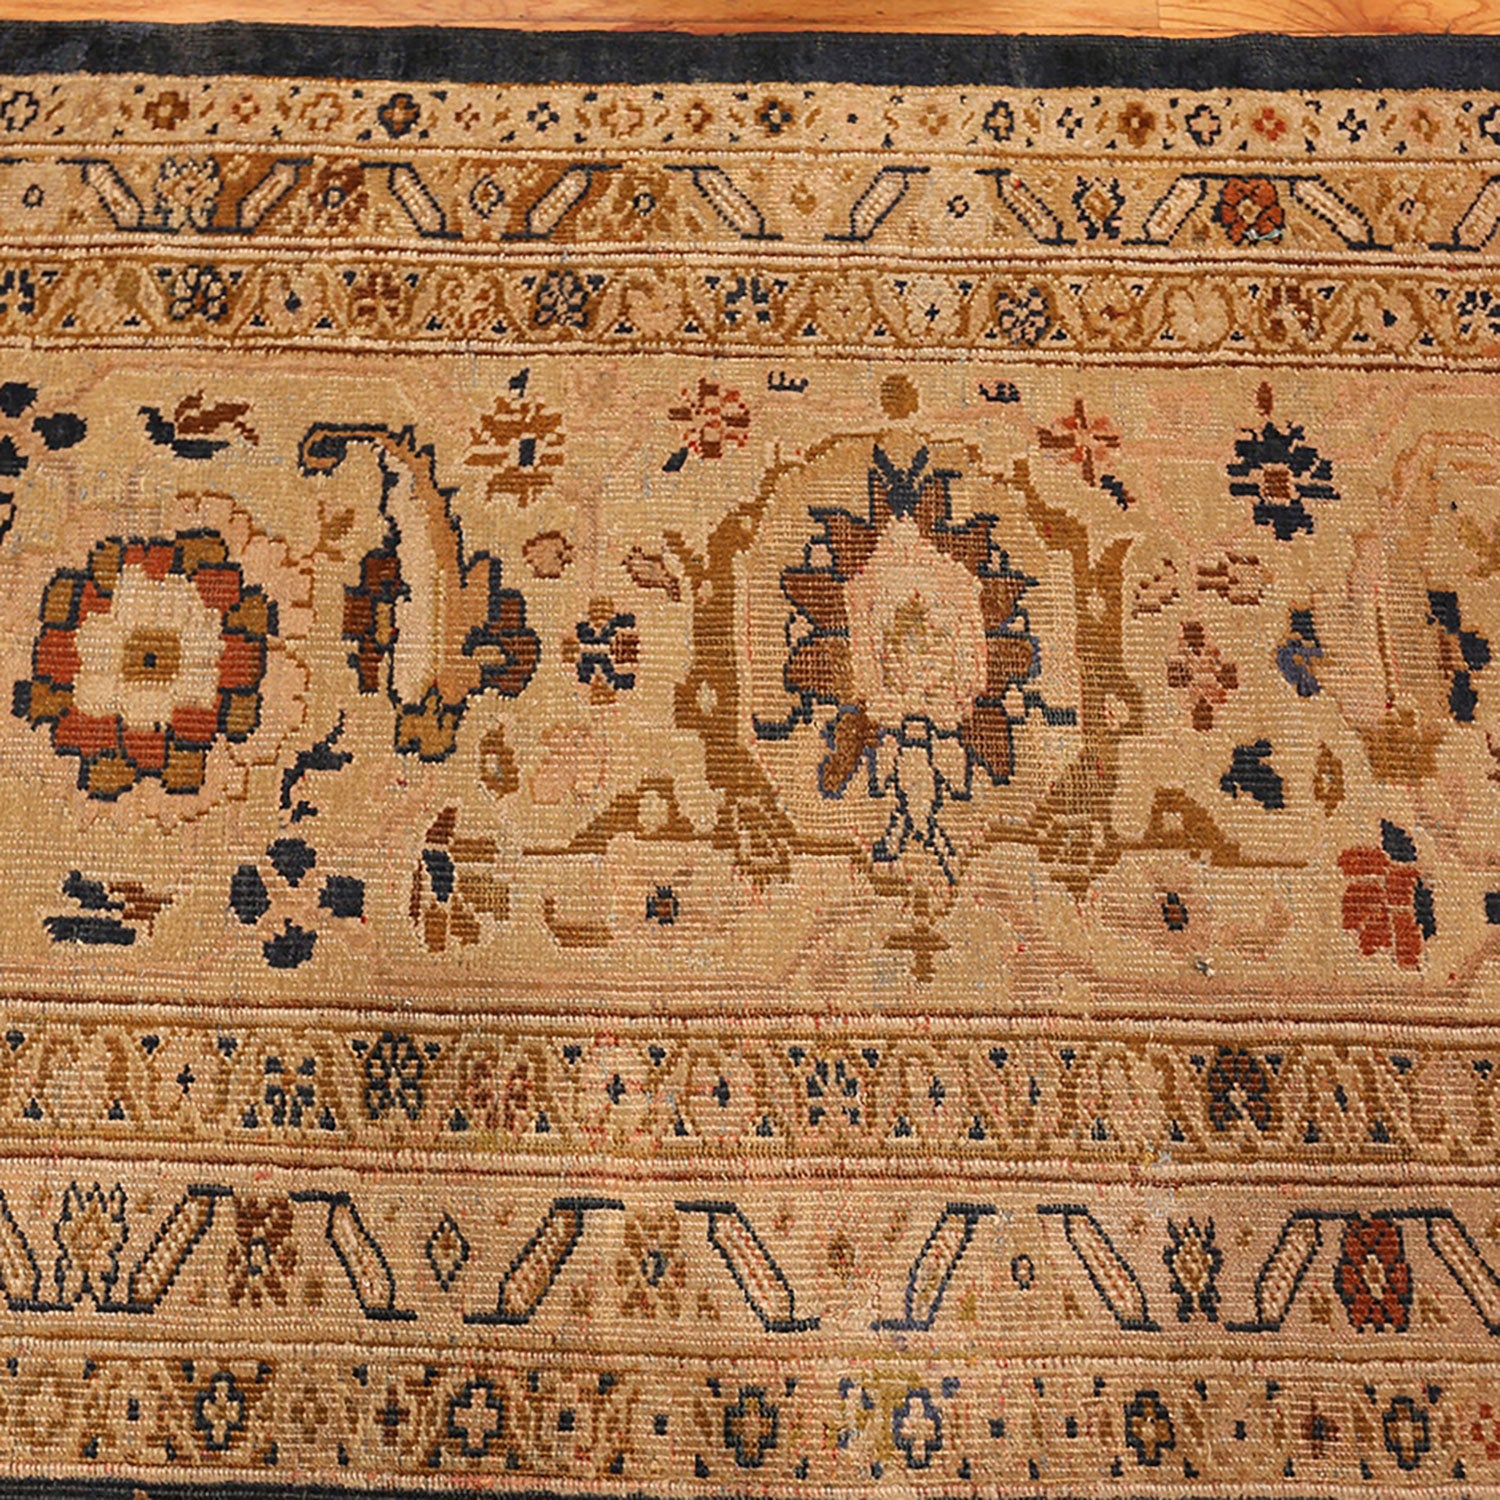 Intricate traditional rug displays detailed patterns and motifs in rich colors.